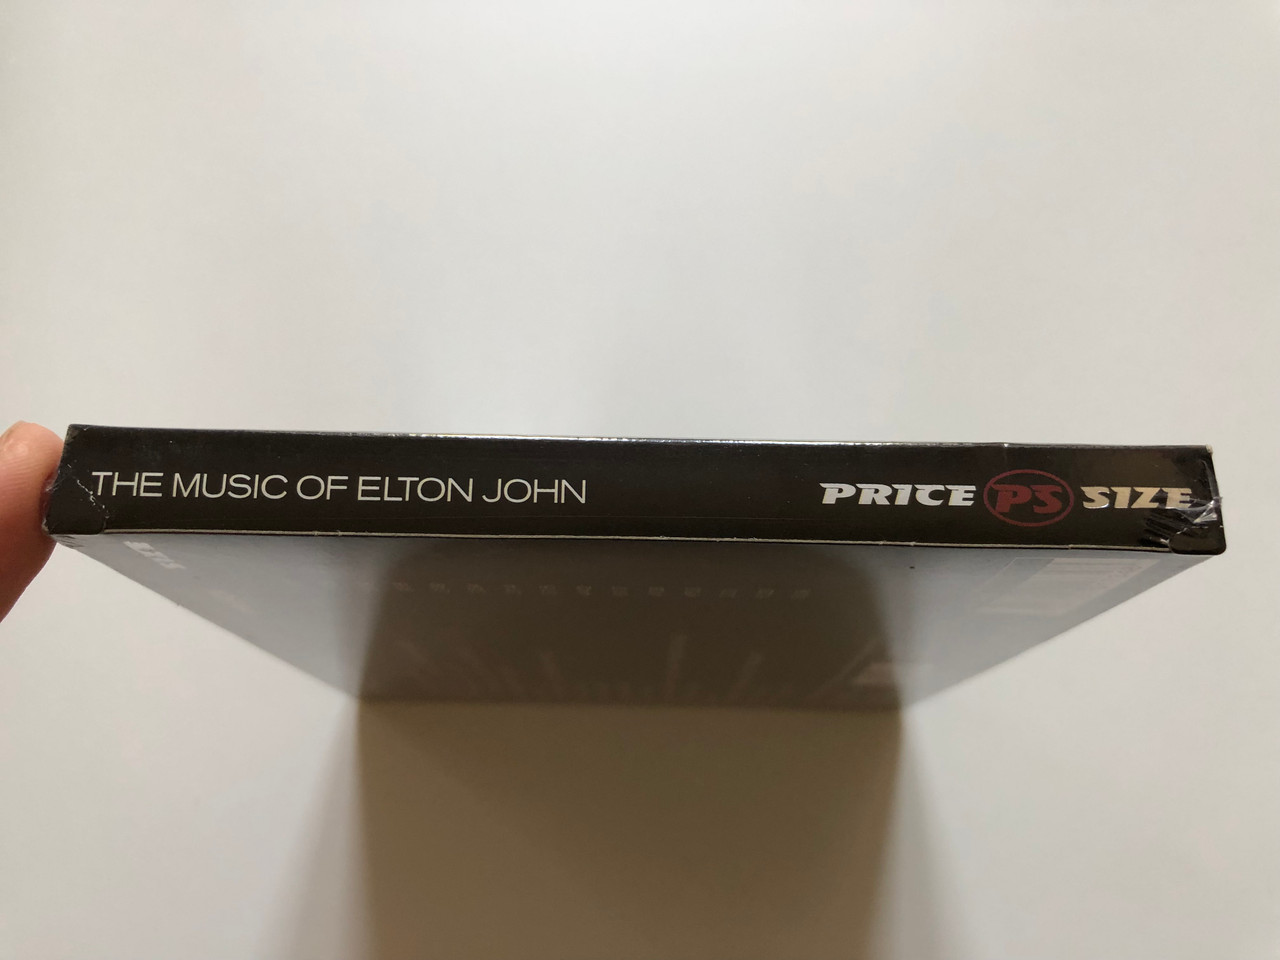 https://cdn10.bigcommerce.com/s-62bdpkt7pb/products/0/images/198039/The_Music_Of_Elton_John_Crocodile_Rock_Dont_Let_The_Sun_Go_Down_On_Me_Bennie_And_The_Jets_Can_You_Feel_The_Love_Tonight_Candle_In_The_Wind_The_Hits_Re-Loaded_Performed_by_The_Clones_3__36911.1635926723.1280.1280.JPG?c=2&_gl=1*rmbe7e*_ga*MjA2NTIxMjE2MC4xNTkwNTEyNTMy*_ga_WS2VZYPC6G*MTYzNTkyMjI4Mi4xNTMuMS4xNjM1OTI3MDAwLjYw